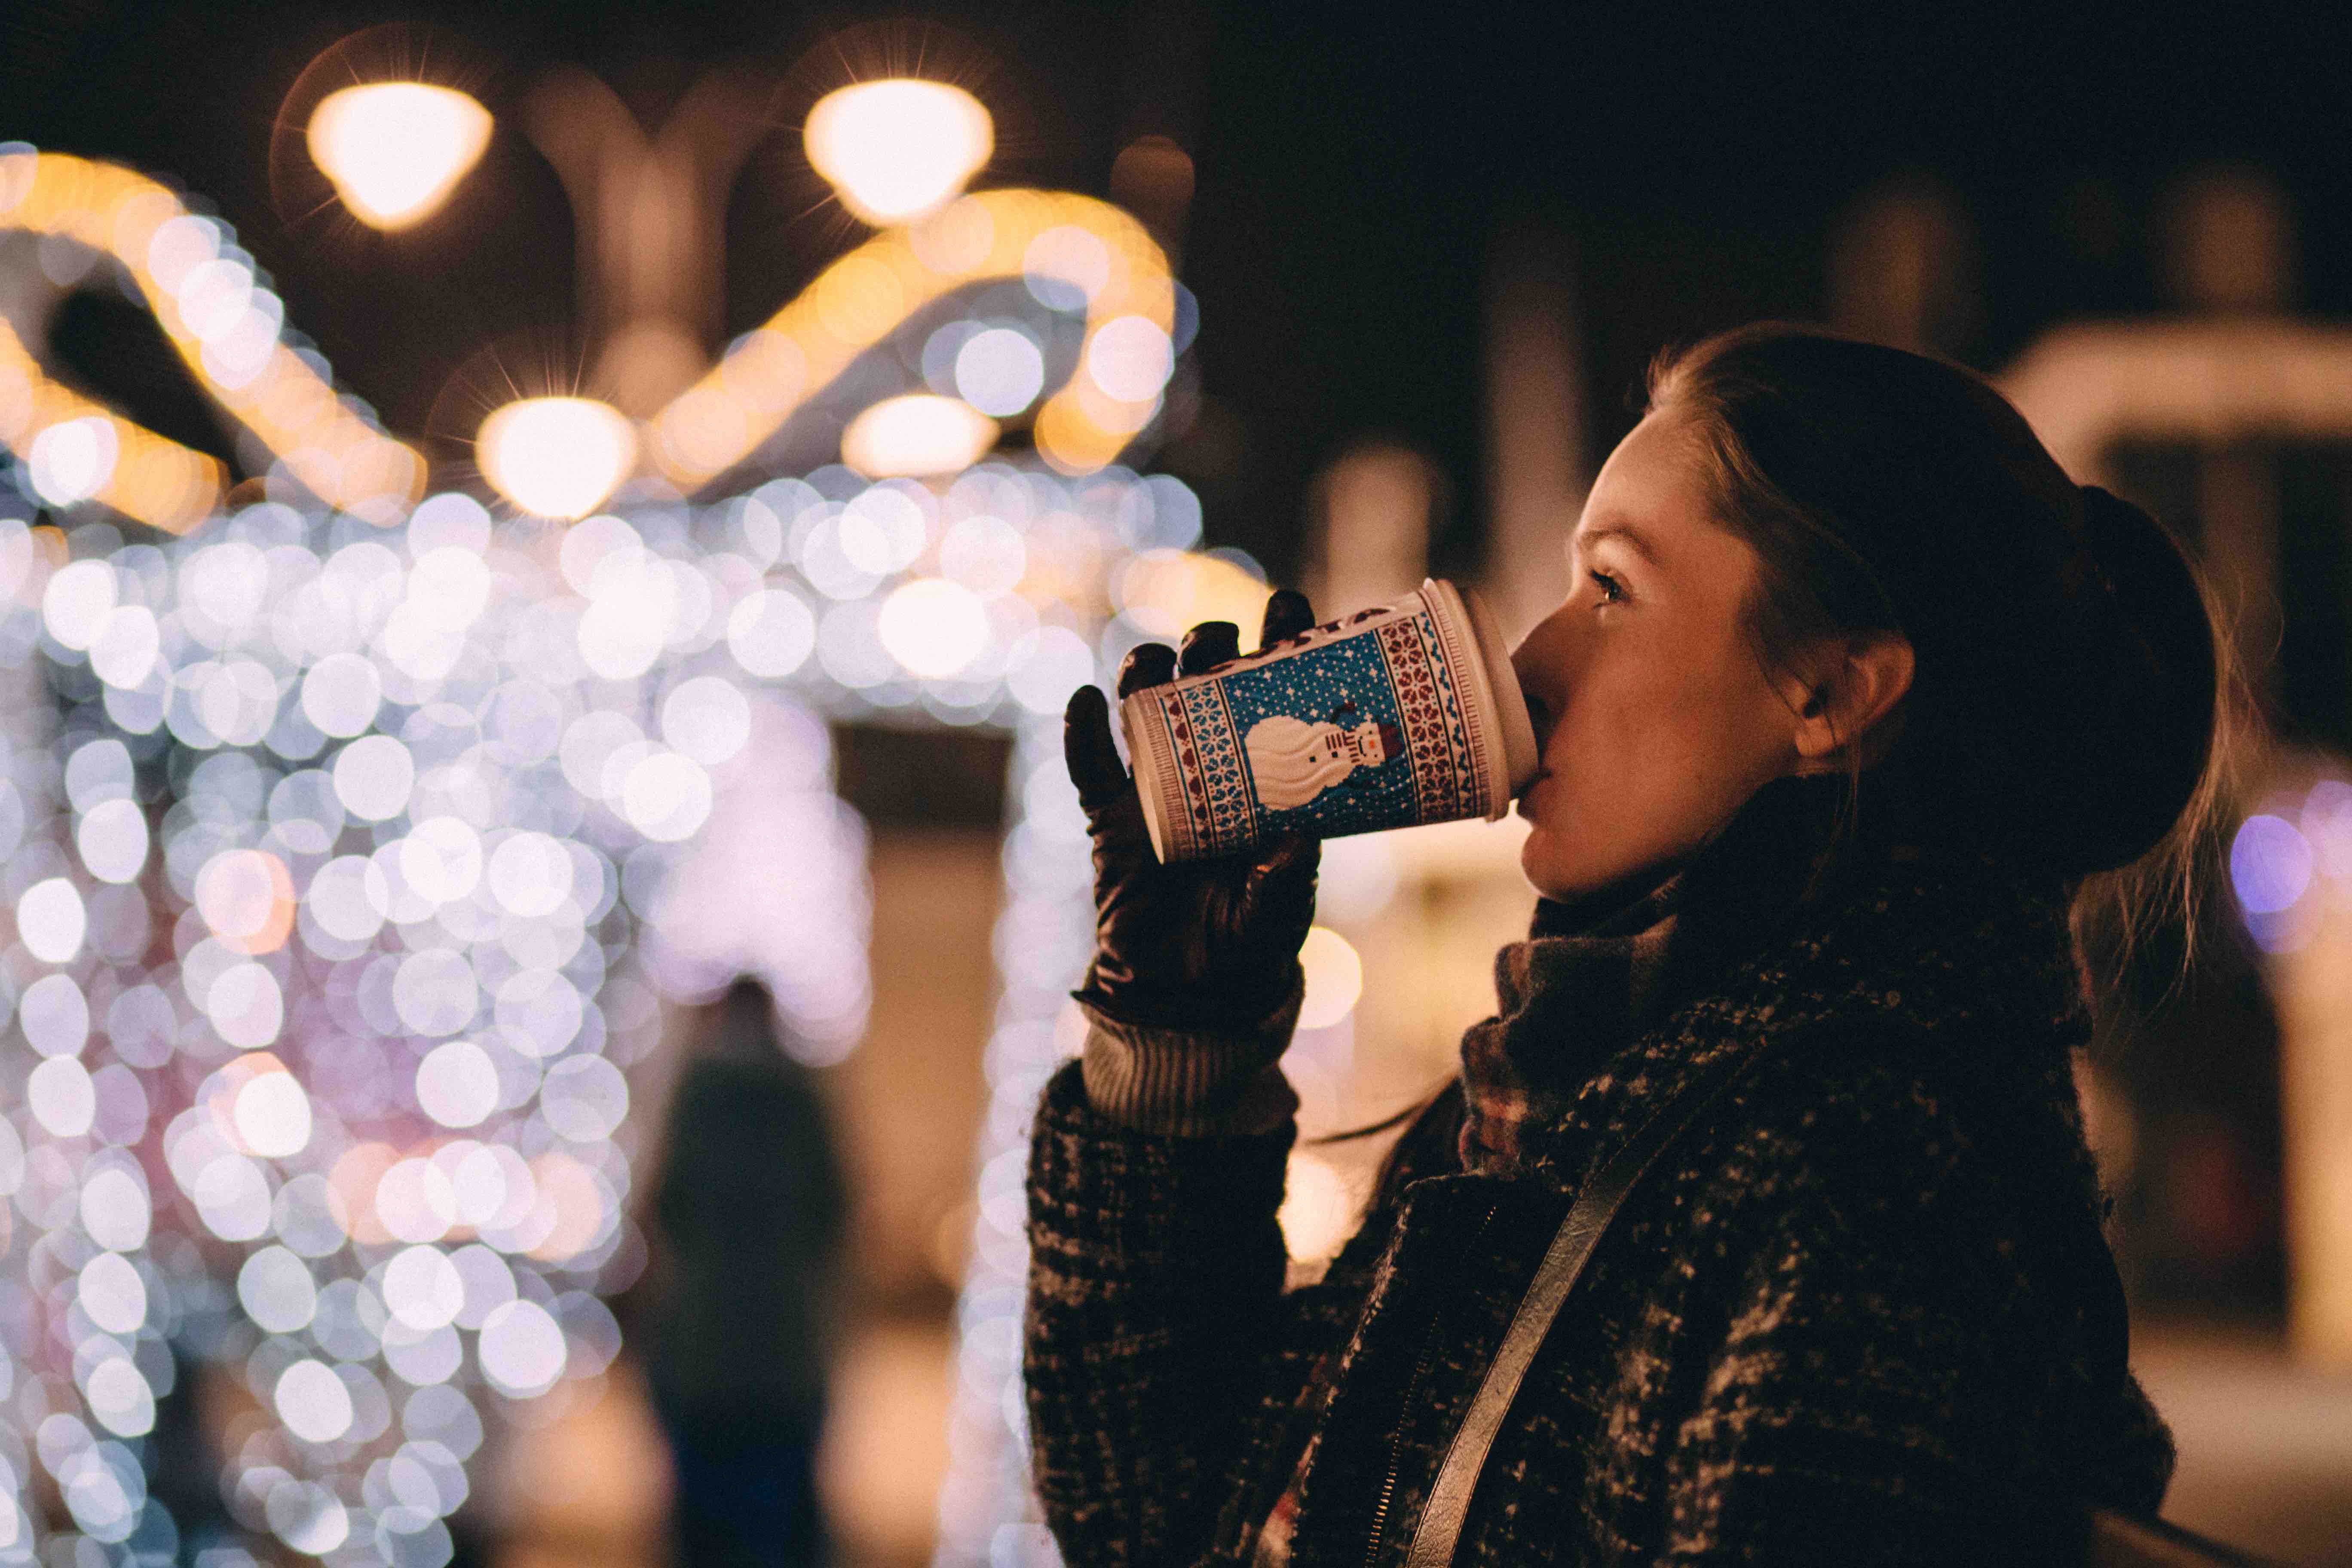 A woman sipping a holiday coffee in front of festive lights at night